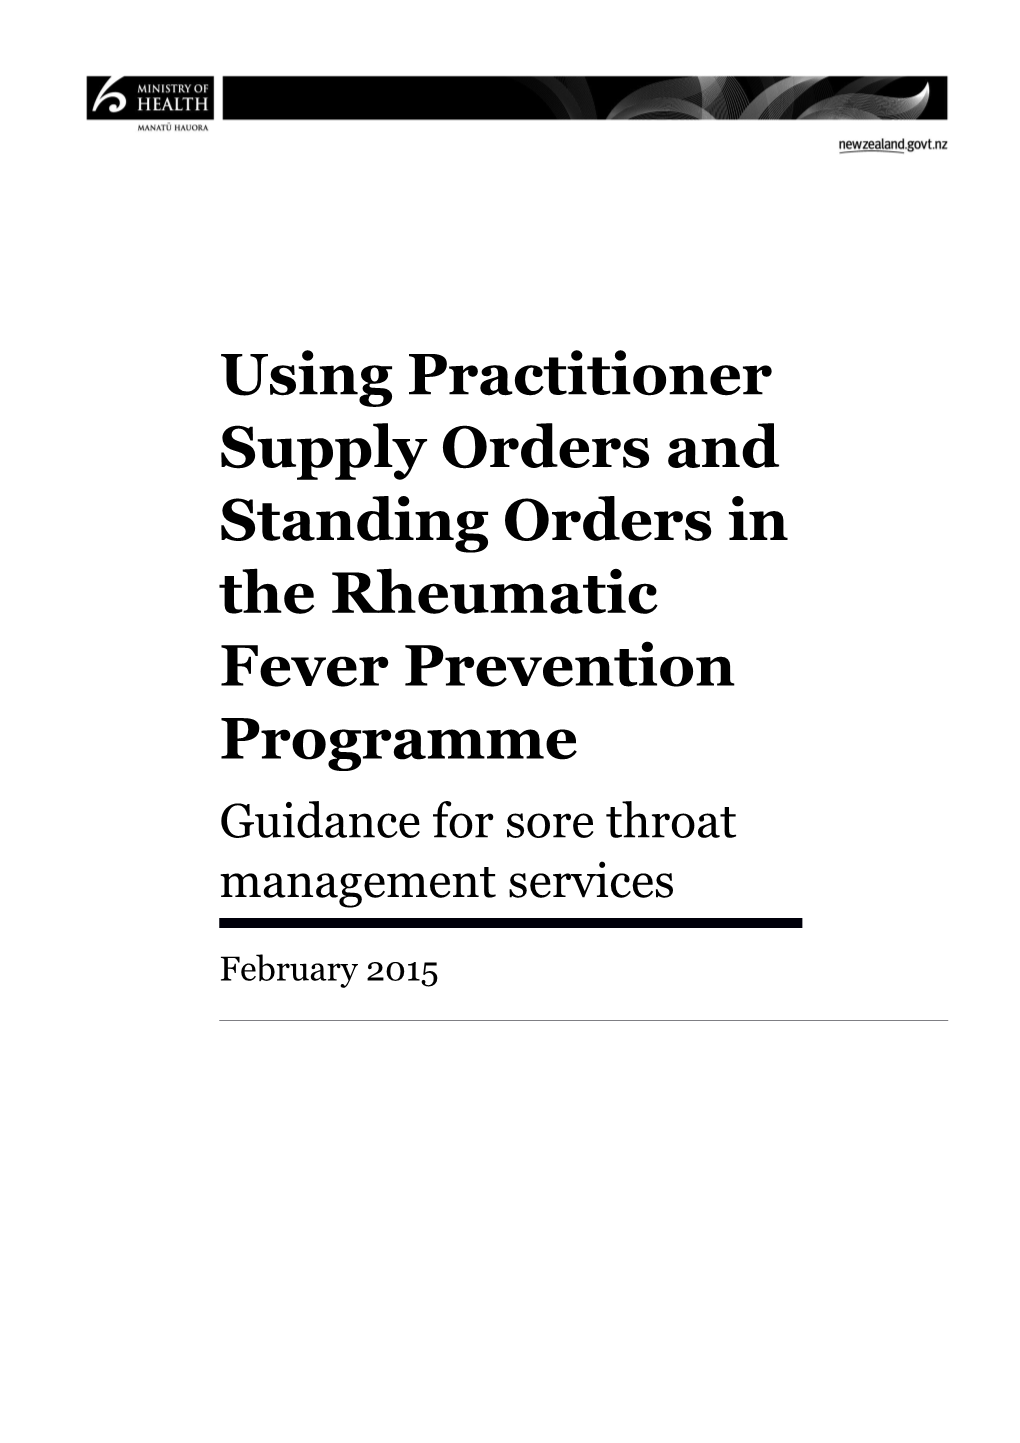 Using Practitioner Supply Orders and Standing Orders in the Rheumatic Fever Prevention Programme